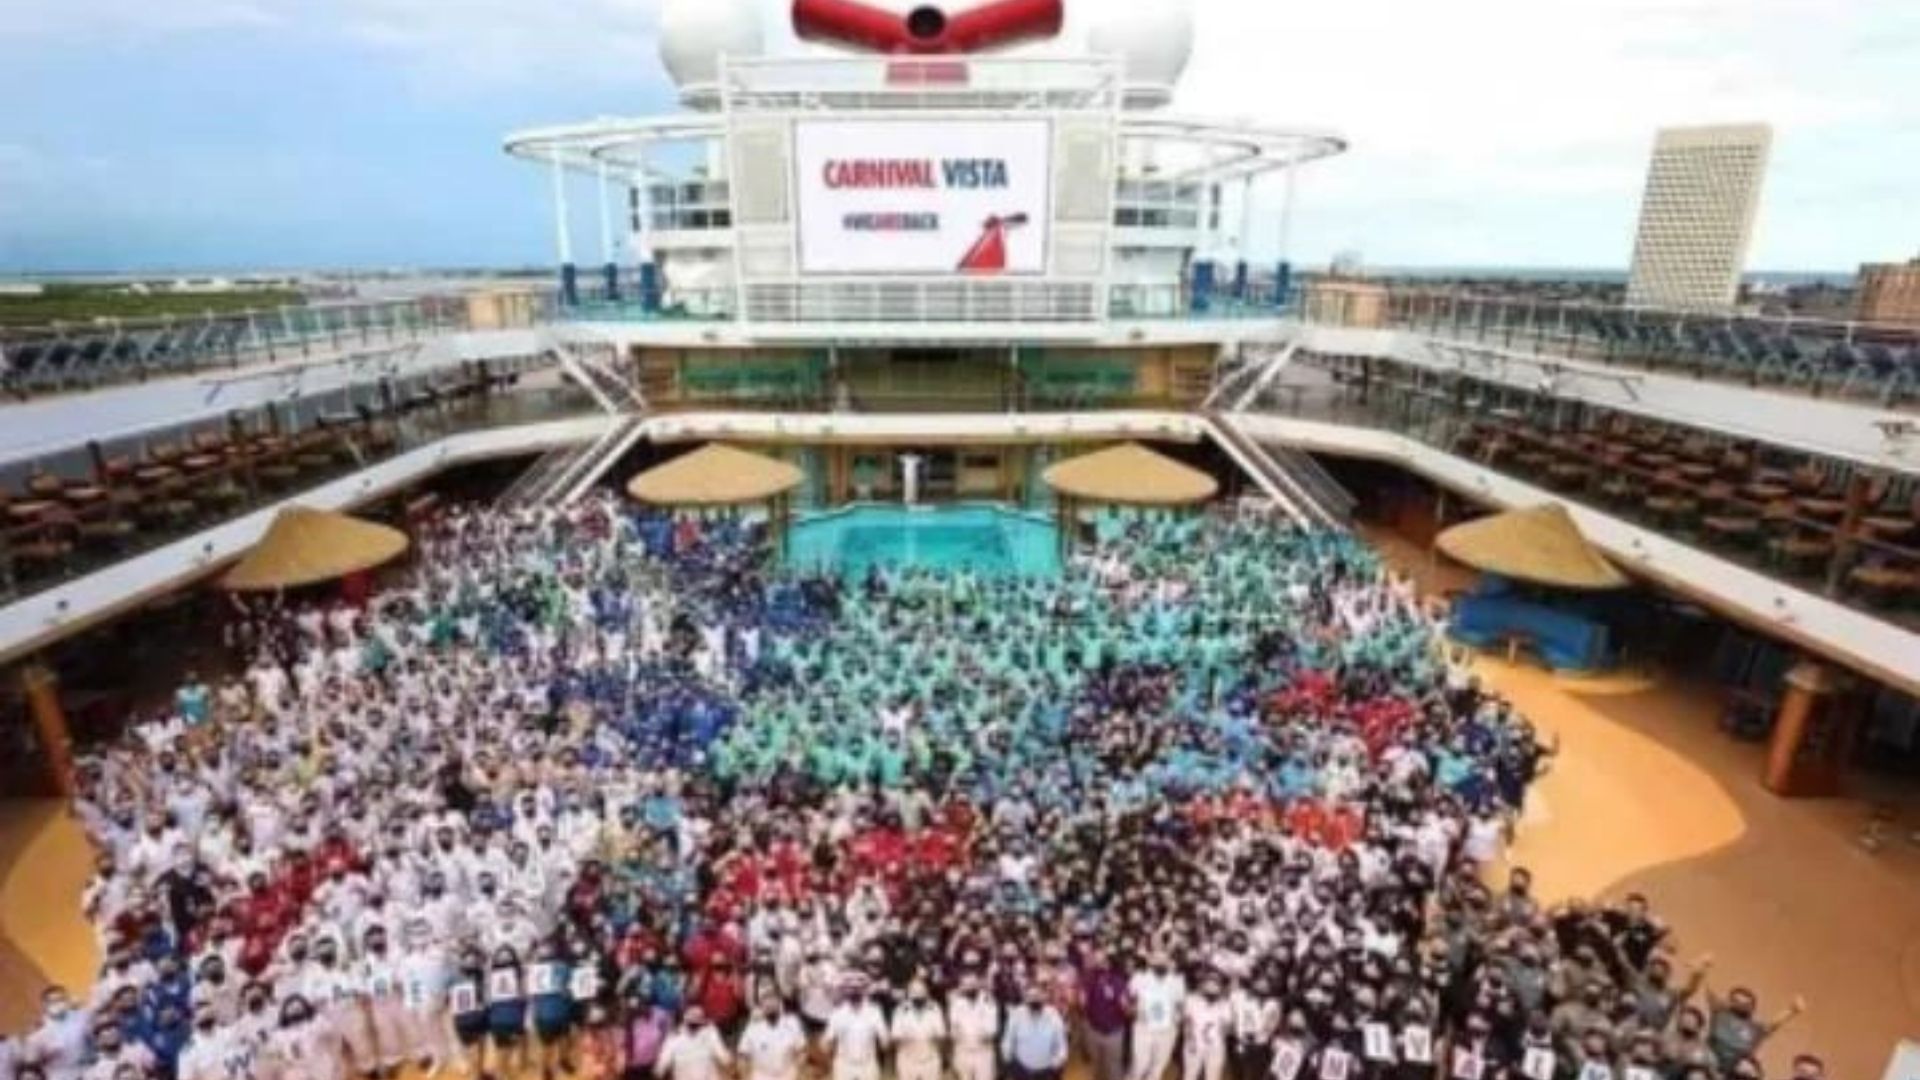 Andrea Catalani to Take the Helm of Carnival Jubilee - Cruise